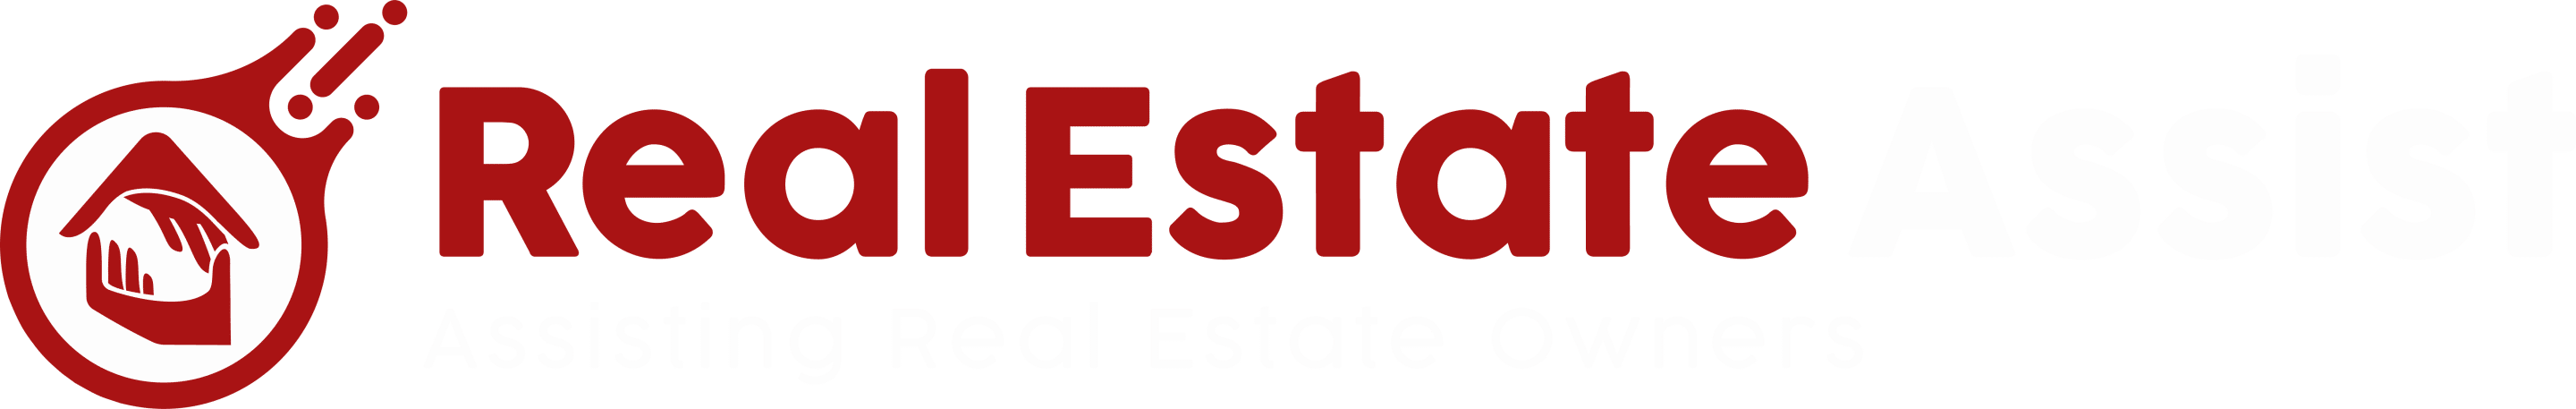 Real Estate Assist Distressed Homeowners